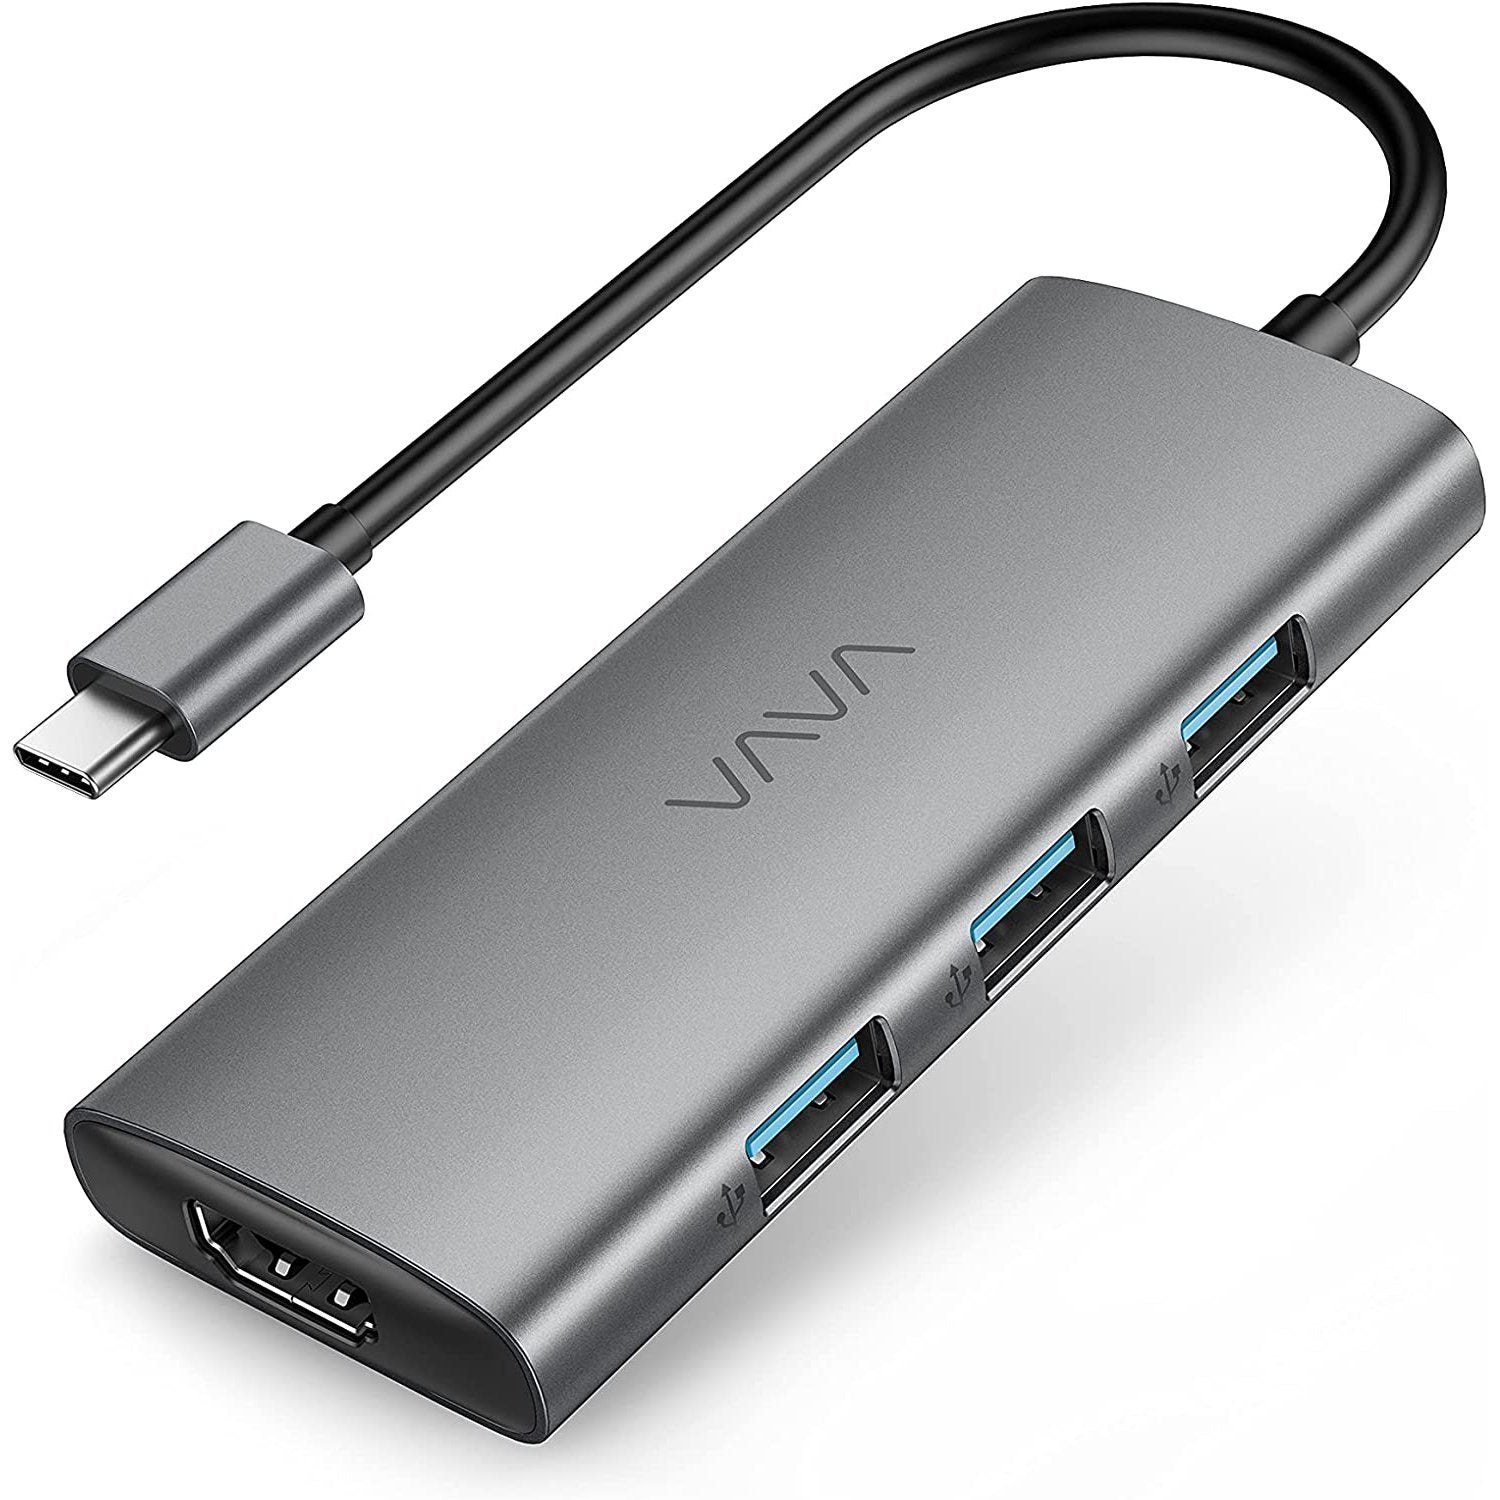 VAVA VA-UC017 7 in 1 USB C Hub with 4K USB-C to HDMI, 3 USB 3.0 Ports, SD/TF Cards Reader, 100W Power Delivery Dock, Gray Default VAVA Default 